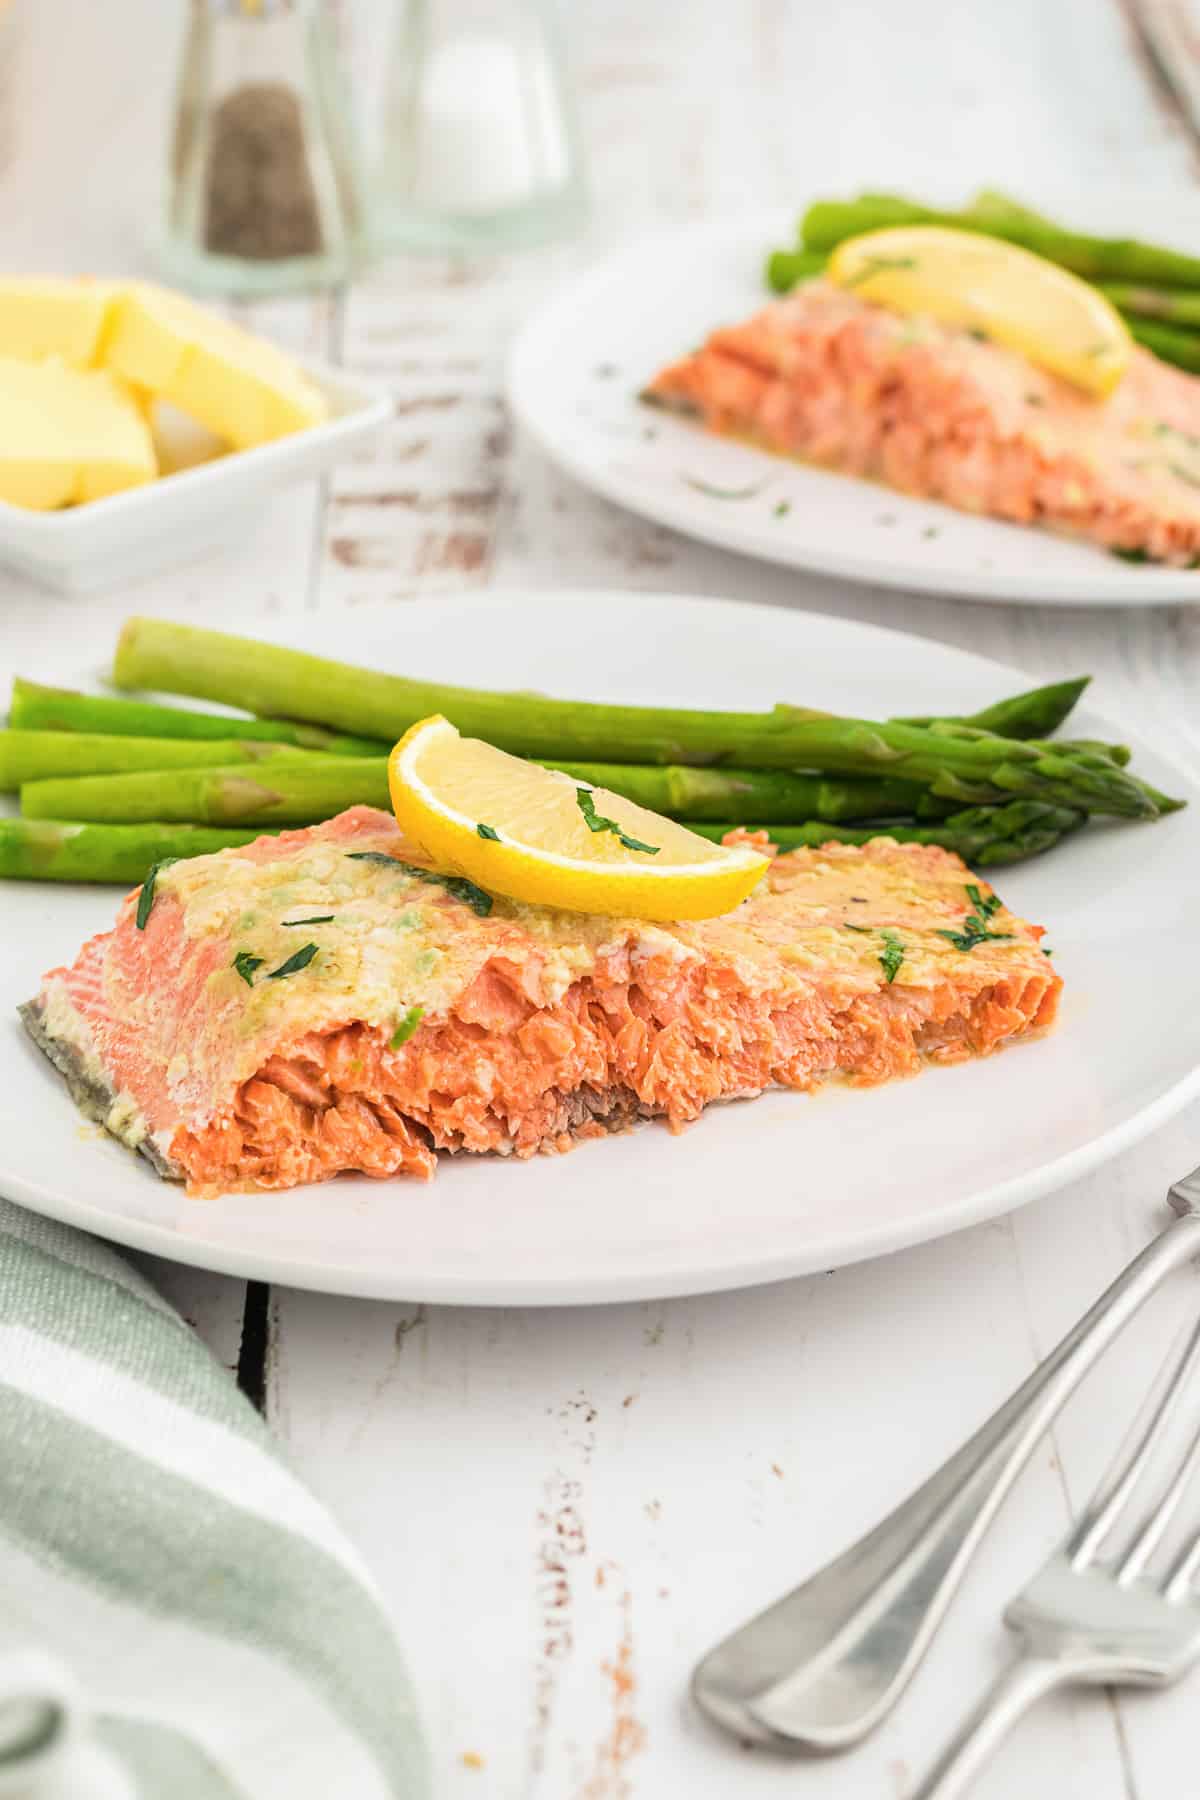 A slice of salmon topped with a slice of lemon on a white plate with asparagus.